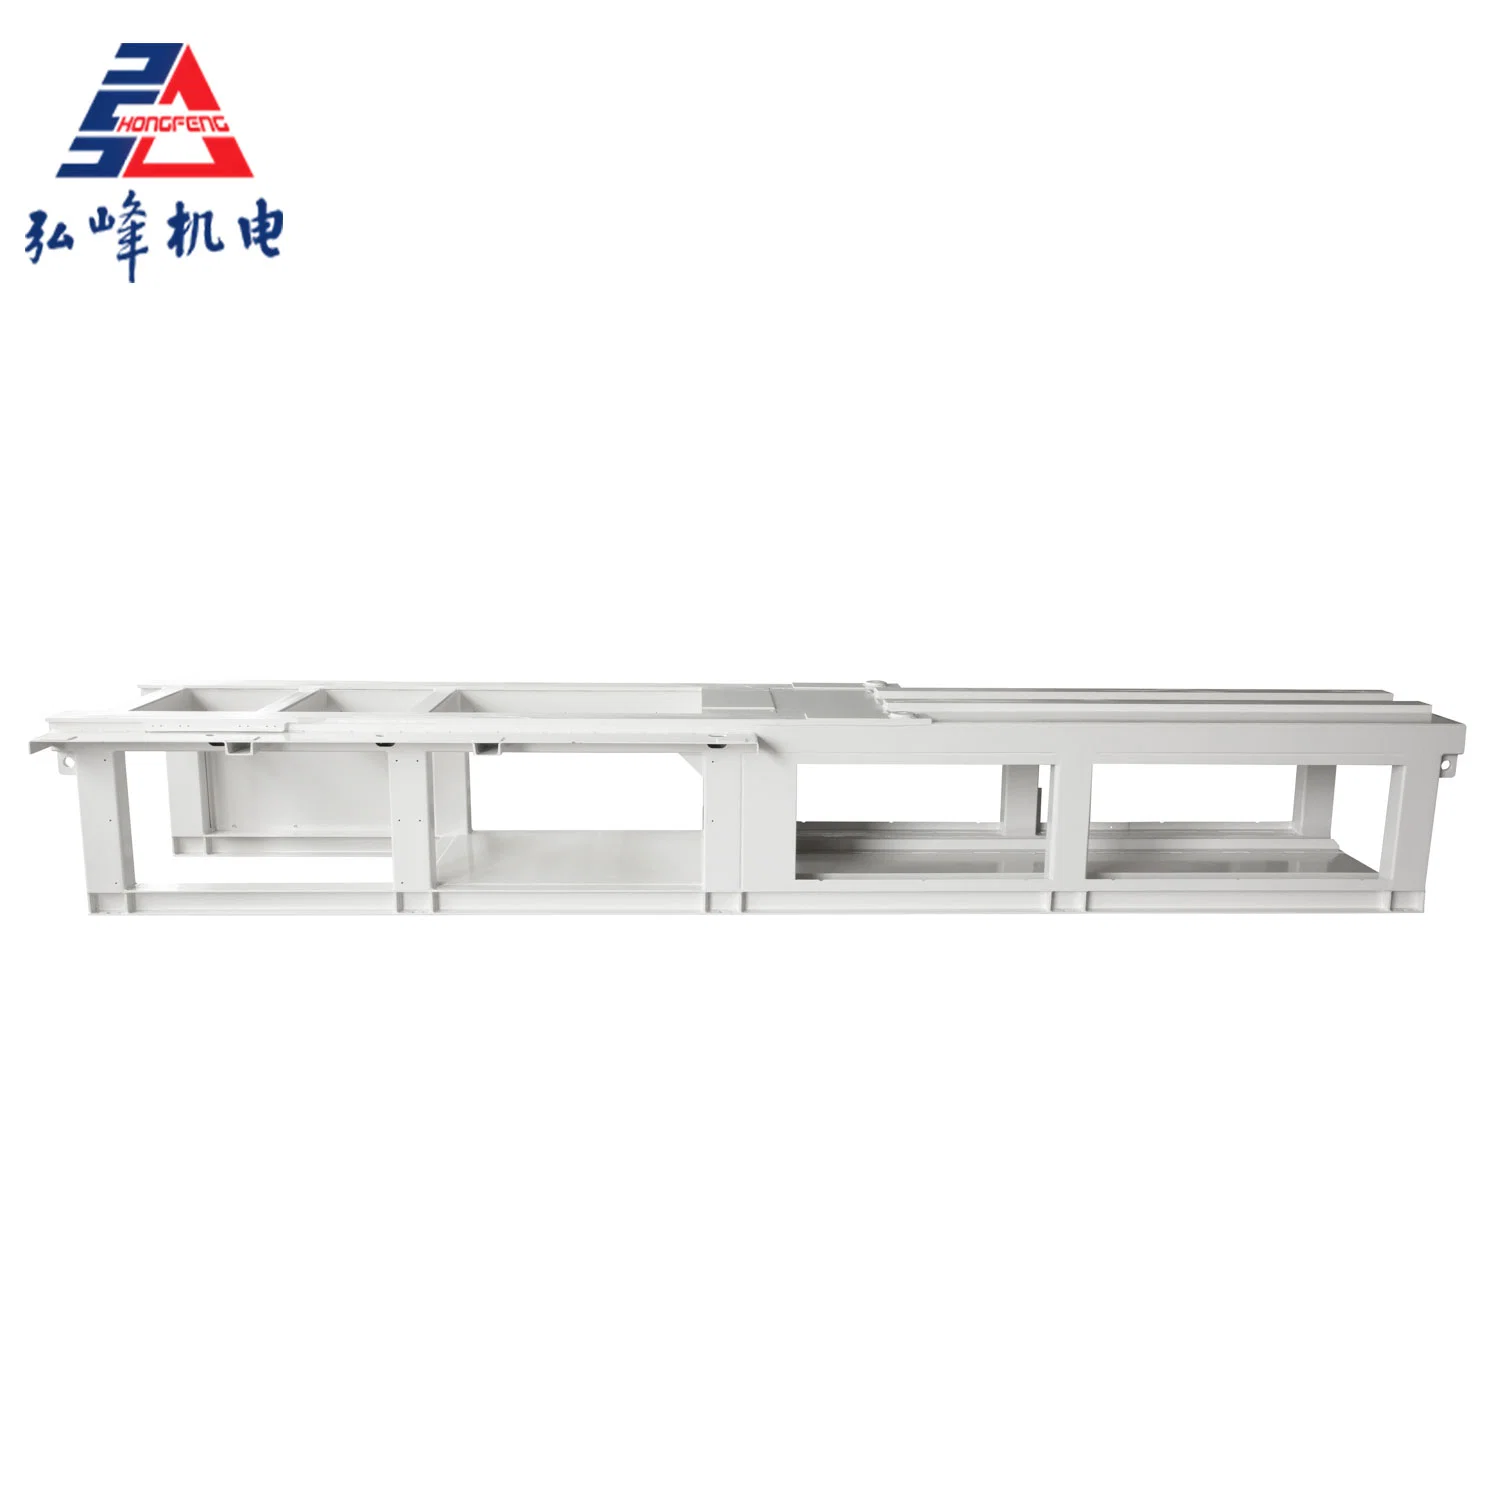 Large Gantry Processing External OEM Steel Quality Plate Manufacturing Tank, Container, Fabrication Base Frame Machine Tool Welding Part